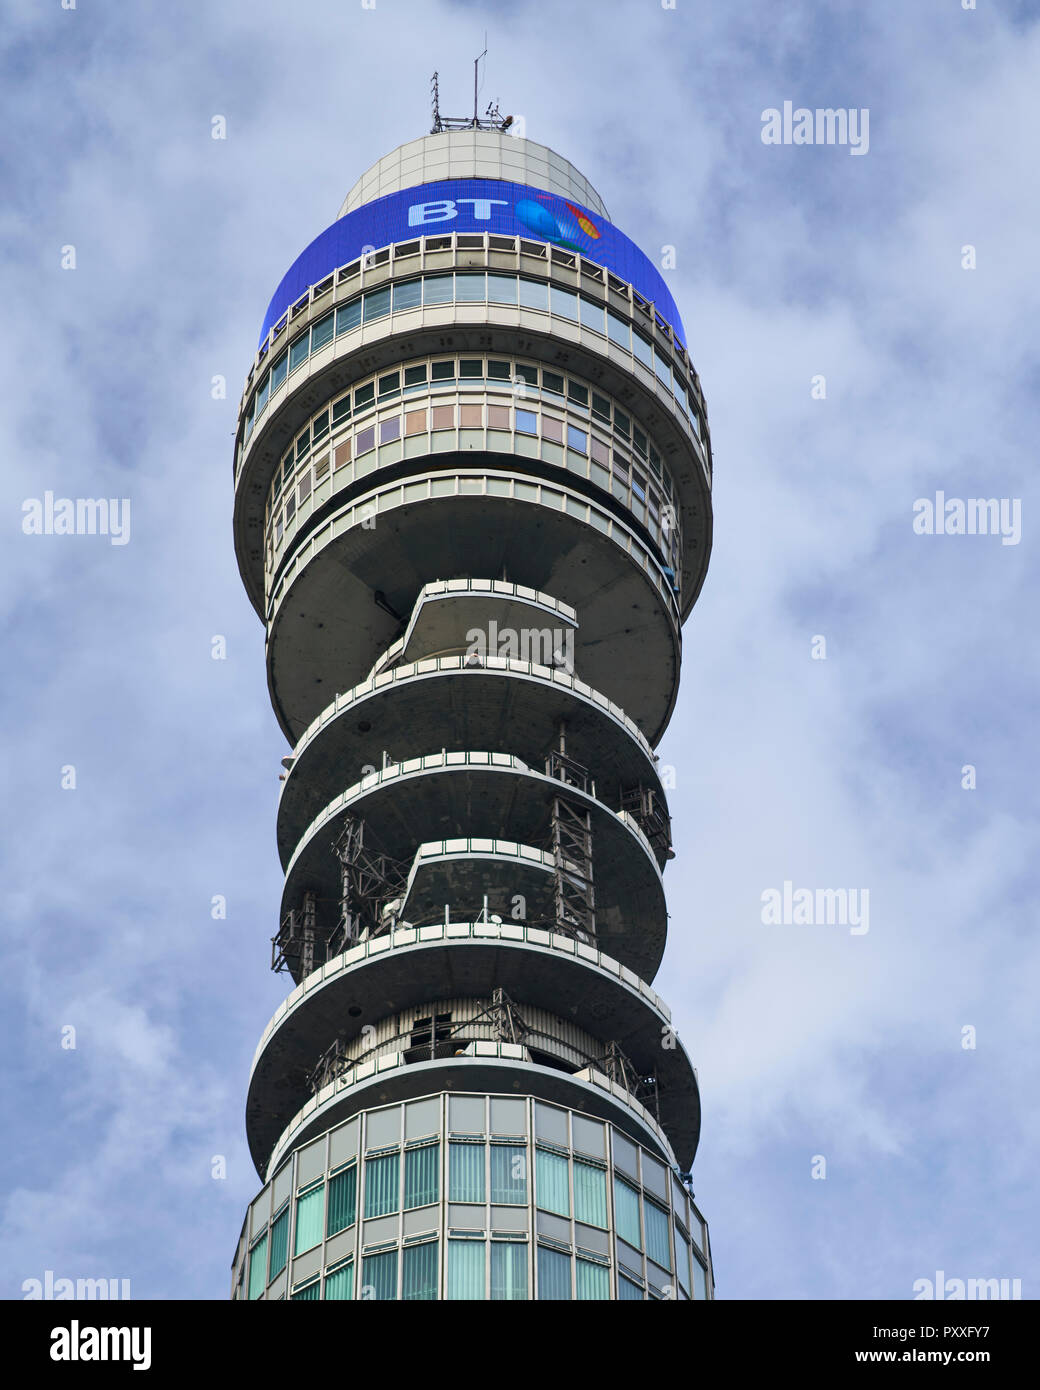 The BT Tower - London Stock Photo